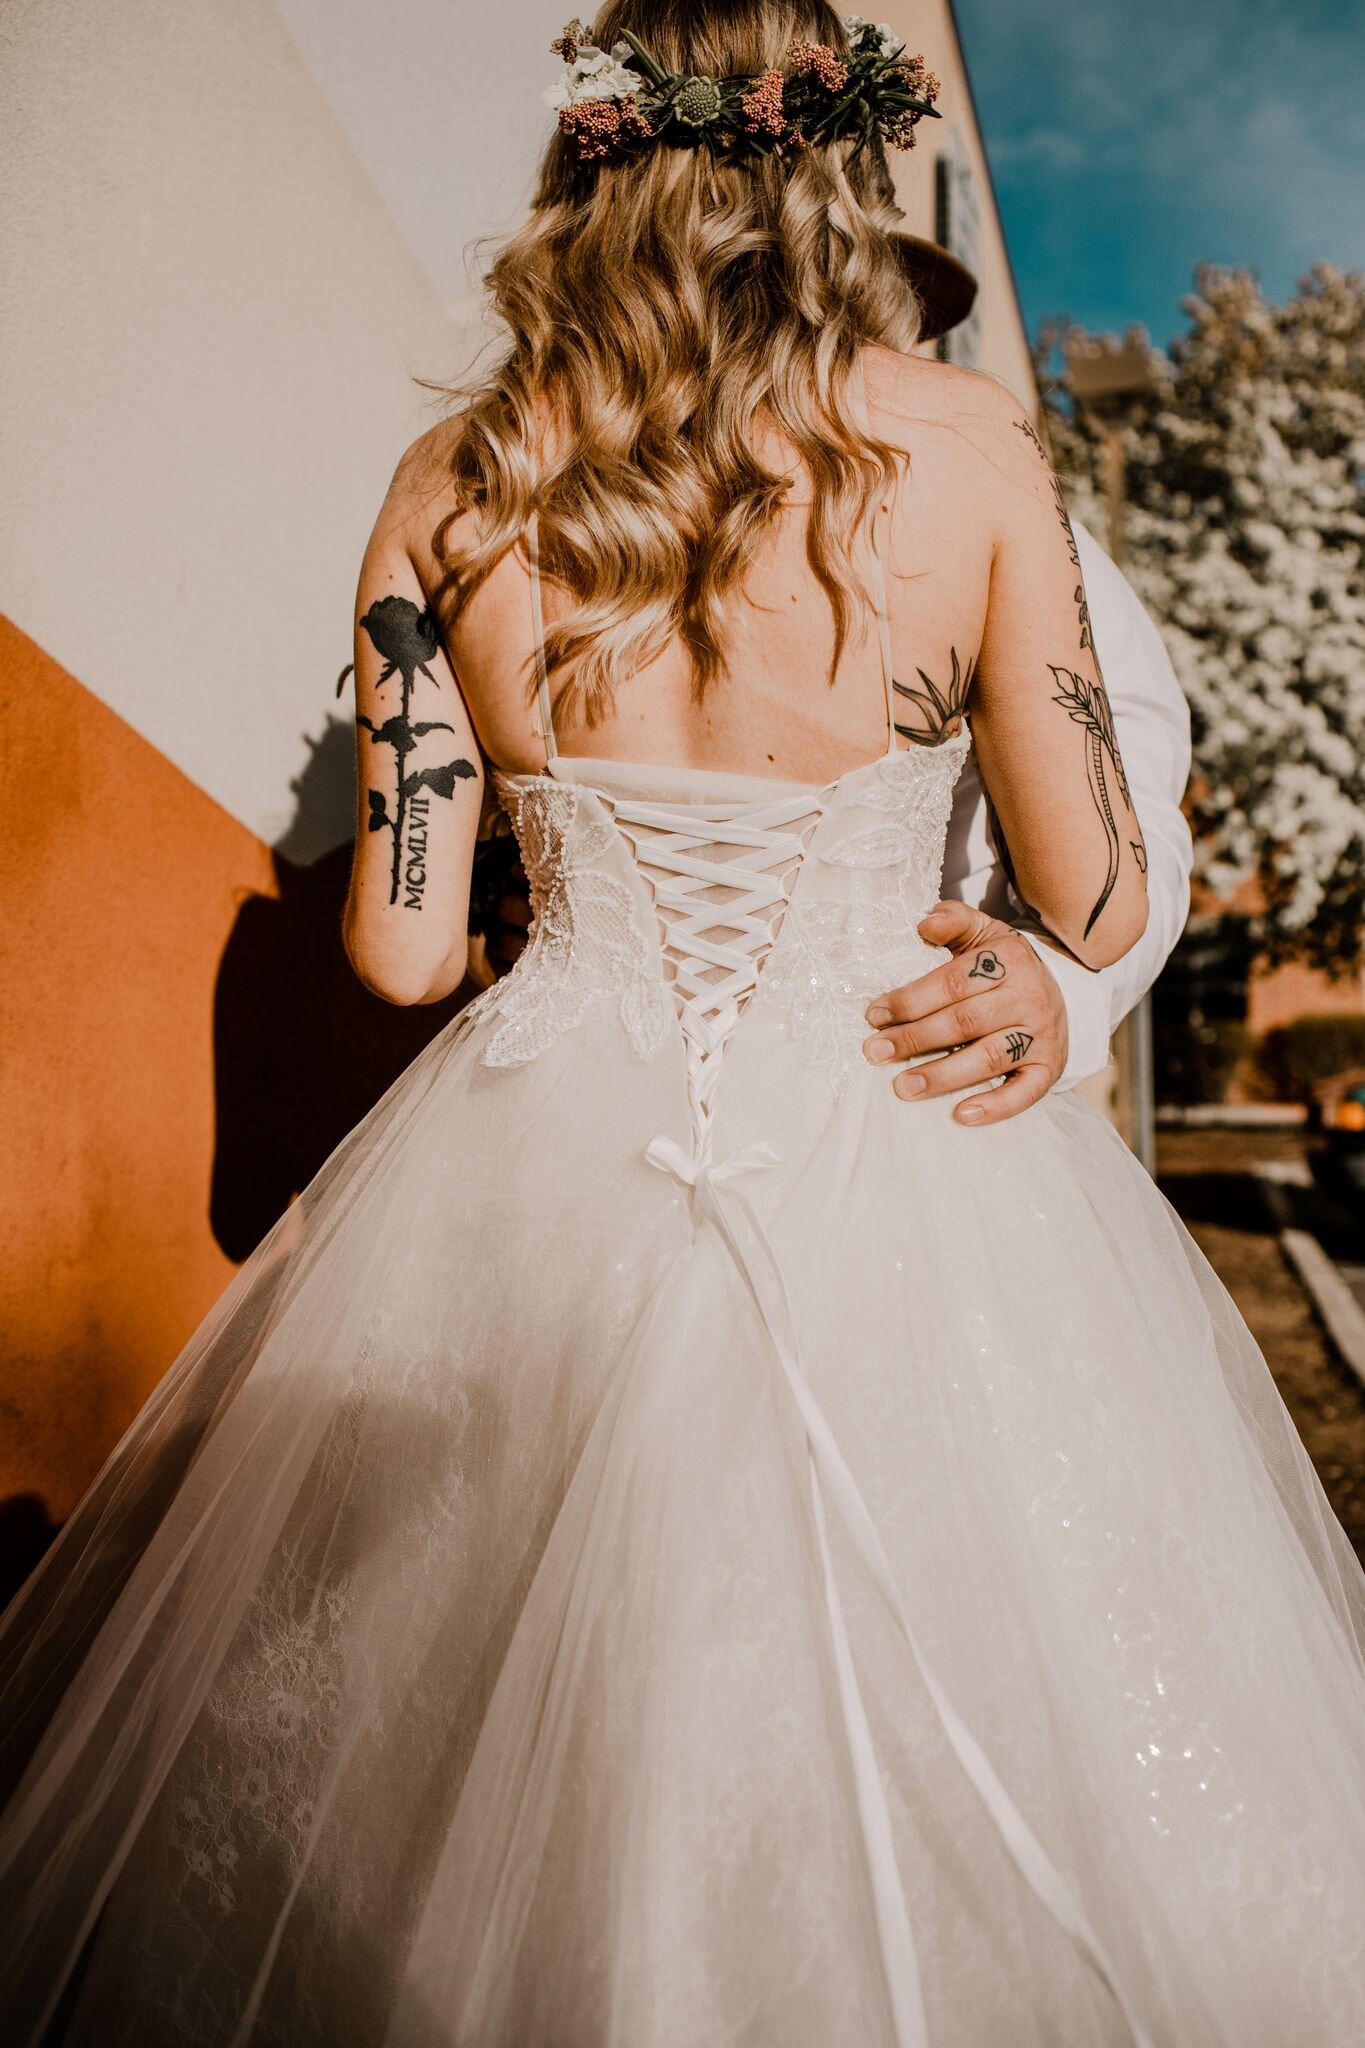 How to Wear a Corset under Your Wedding Dress?